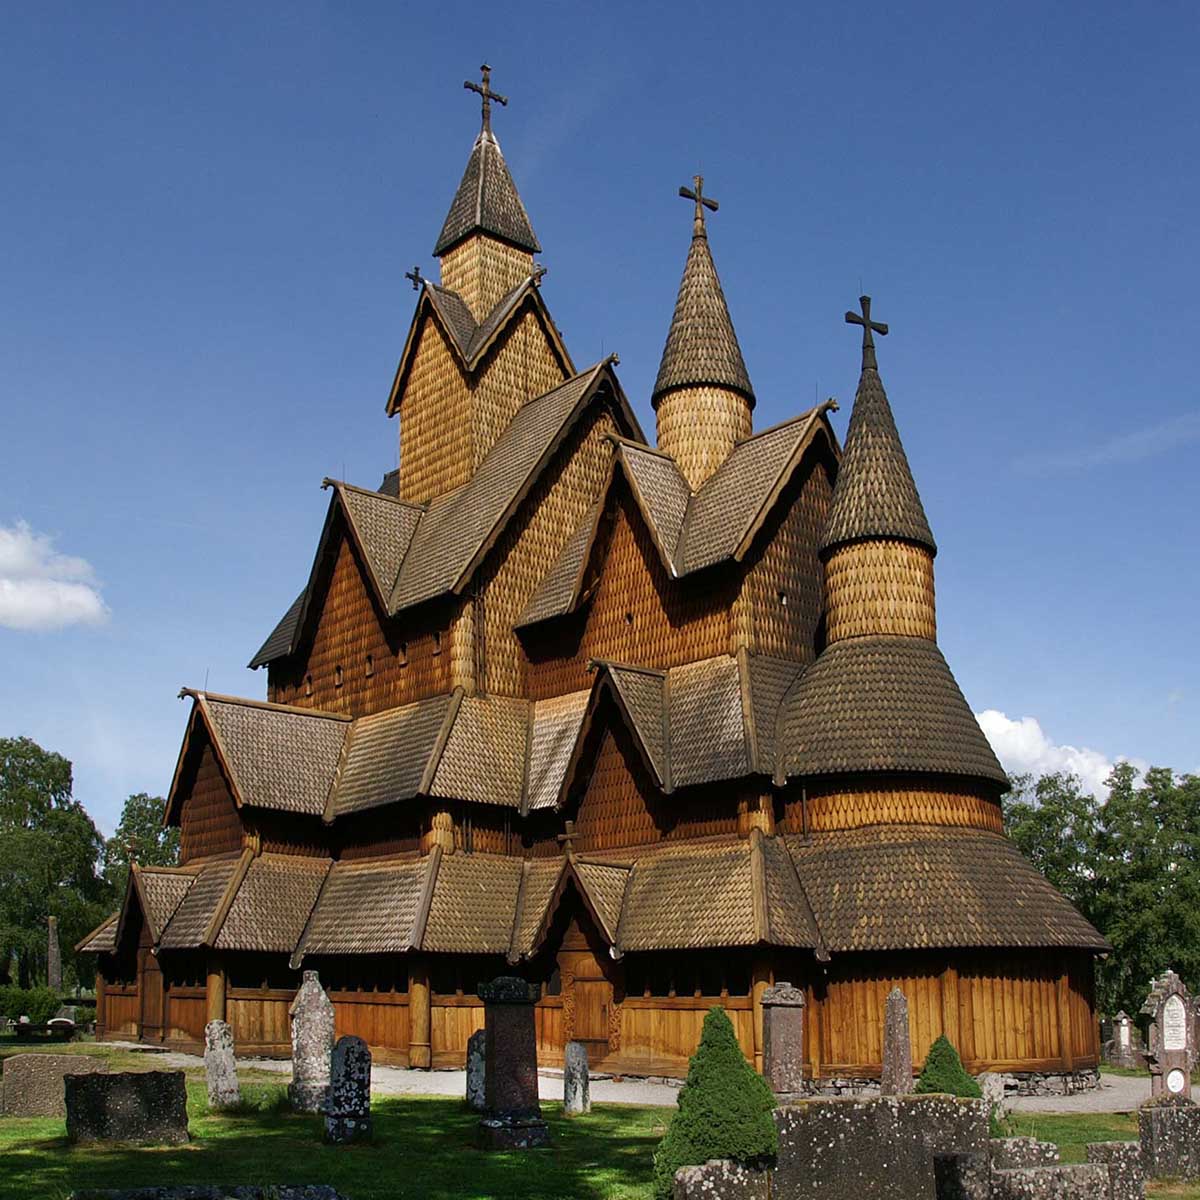 12th Century Wood Church in Norway with Wood Exterior